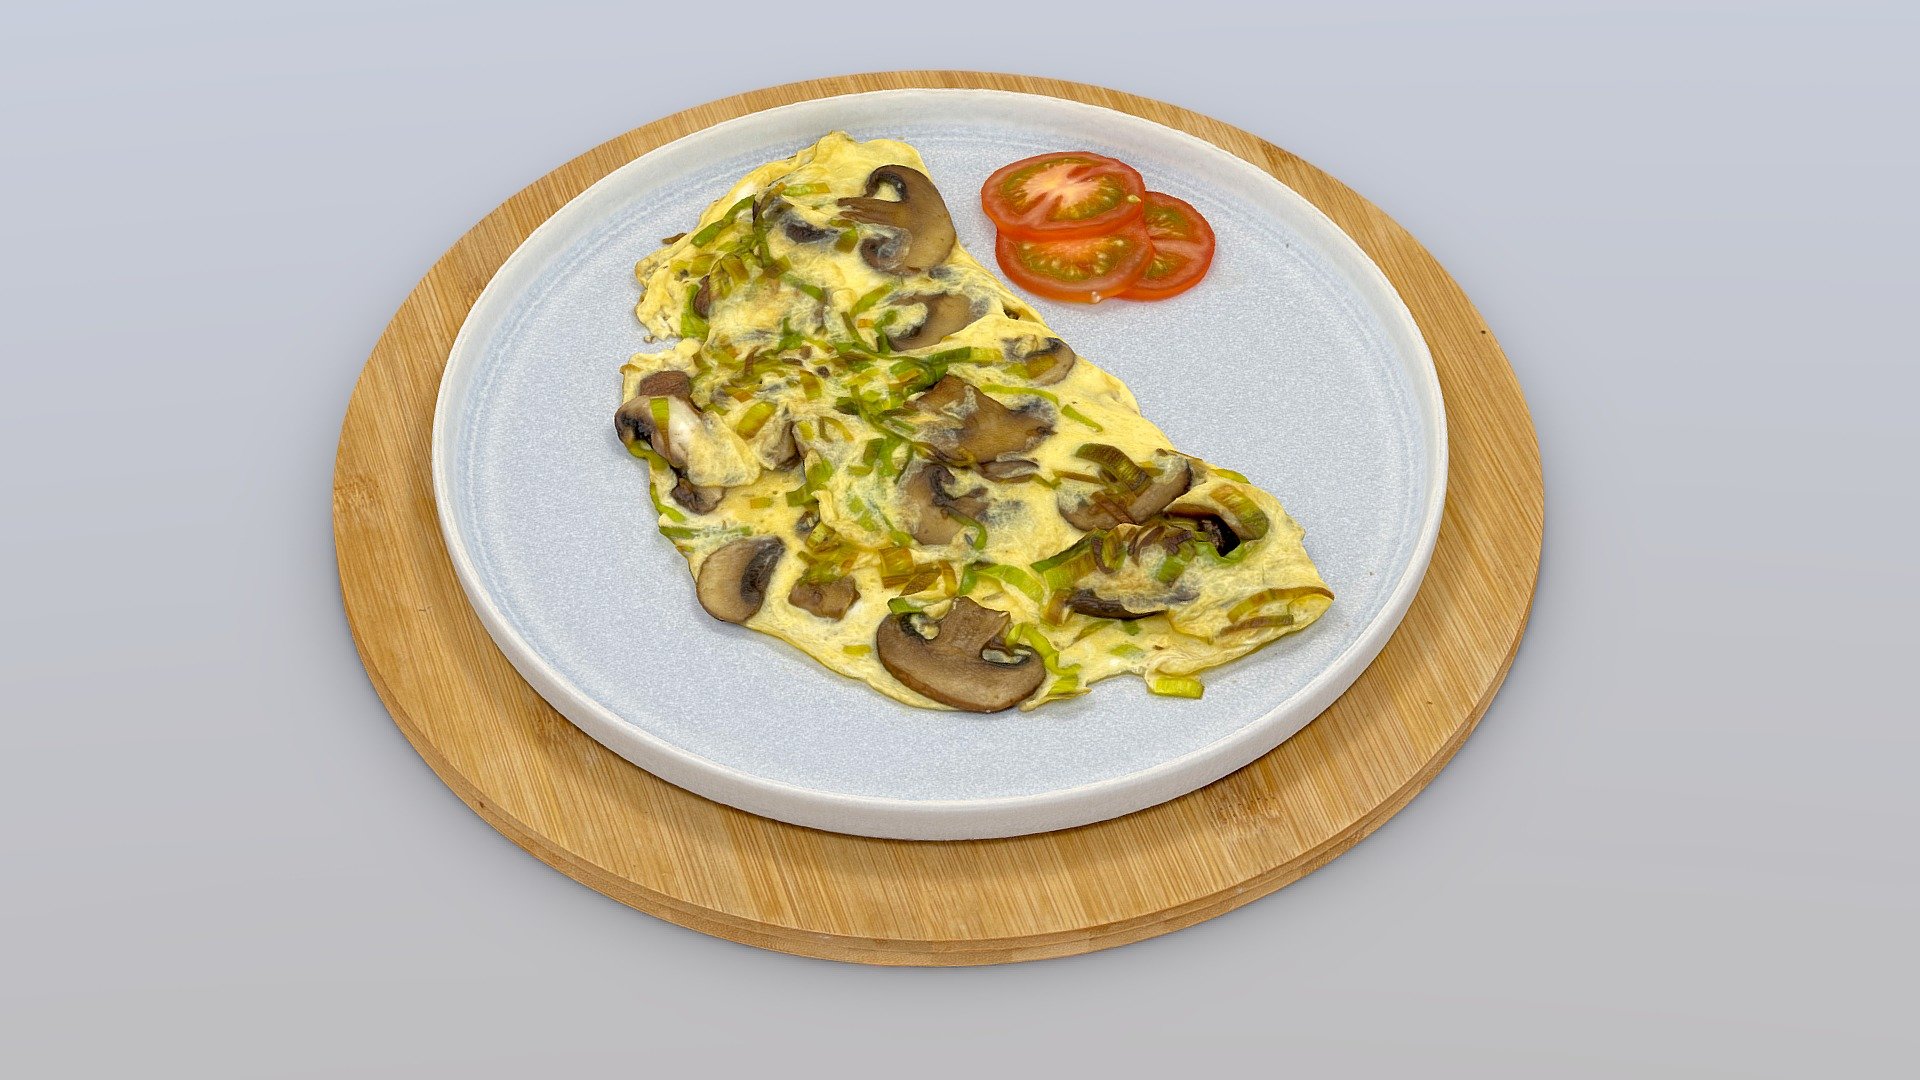 Breakfast for Saturday: Mushroom, Spring onion, Omelette




Stay updated! Follow me on LinkedIn and  Instagram

Explore the Food Metaverse in AR/VR on Zoltanfood.com

Want to show support? Become a patron on [Patreon](https://www.patreon.com/zoltanfood

3D High Quality scan for Augmented Reality, Mixed Reality, Virtual reality, Near-Life Reality  (High and Low poly) - Breakfast for Saturday: Omelette - Buy Royalty Free 3D model by Zoltanfood 3d model